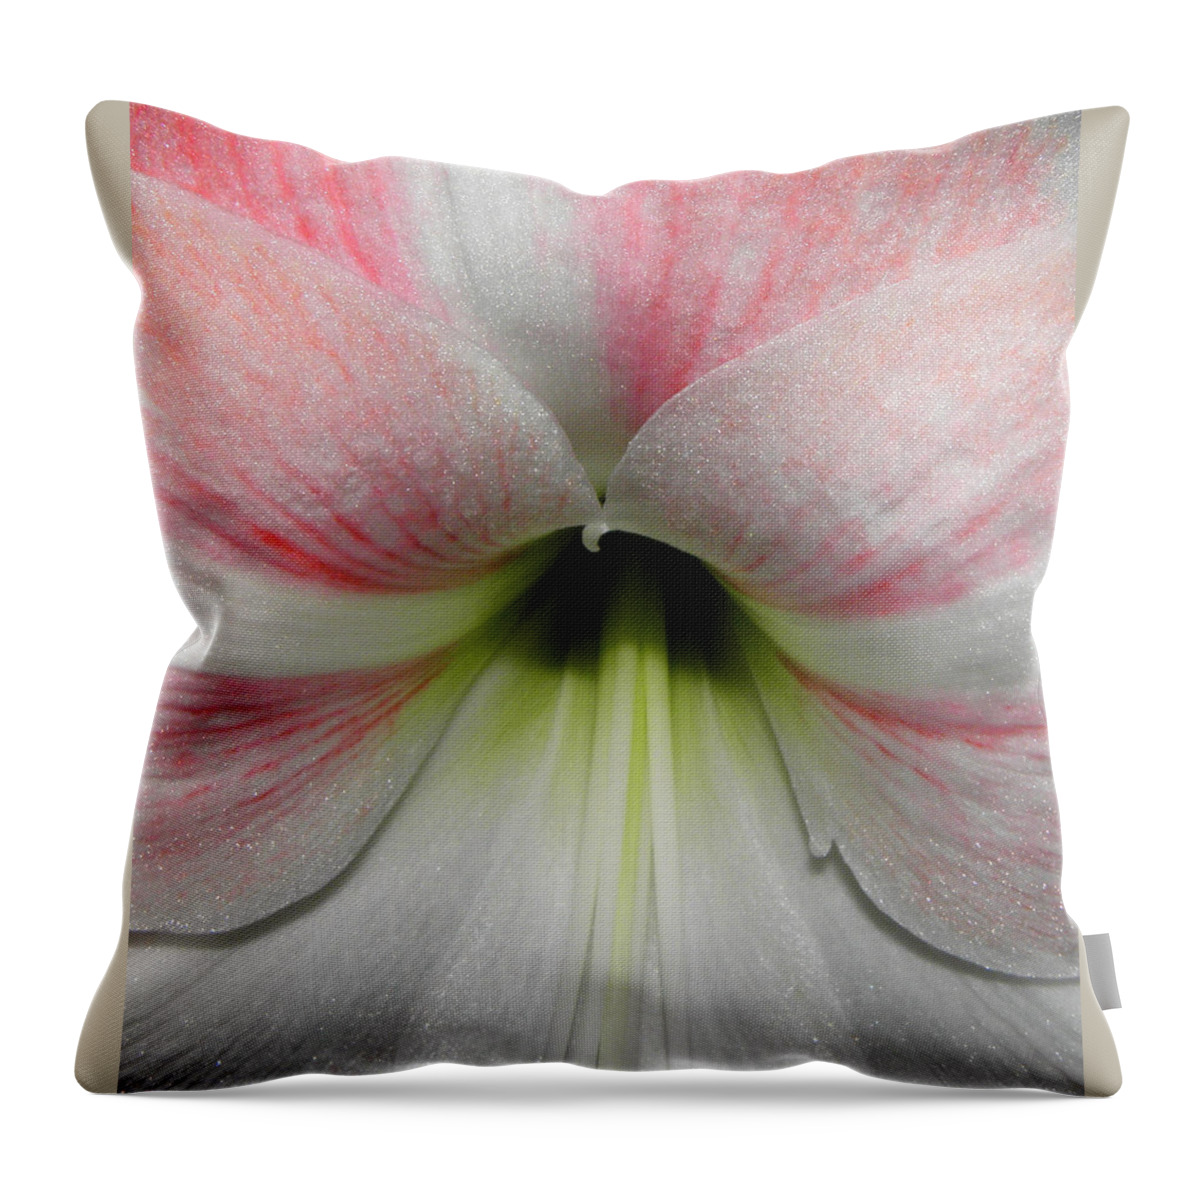 Pink Throw Pillow featuring the photograph Streaks Of Pink by Kim Galluzzo Wozniak